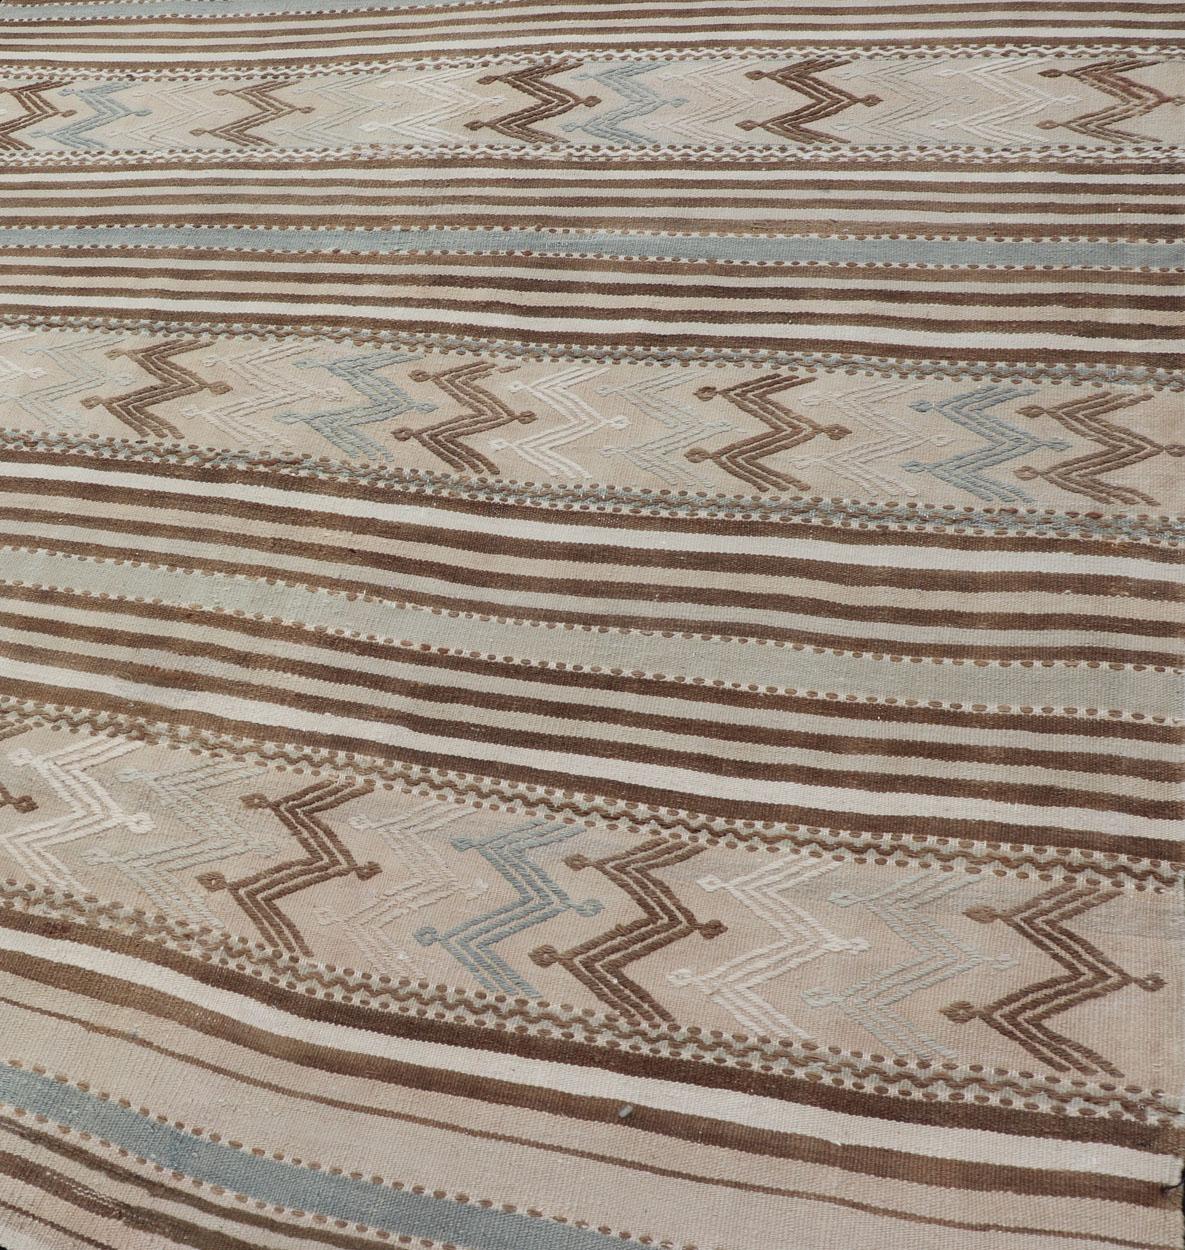 Hand-Woven Turkish Hand Woven Flat-Weave Embroideries Kilim in Taupe, Brown, and Lt. Blue  For Sale